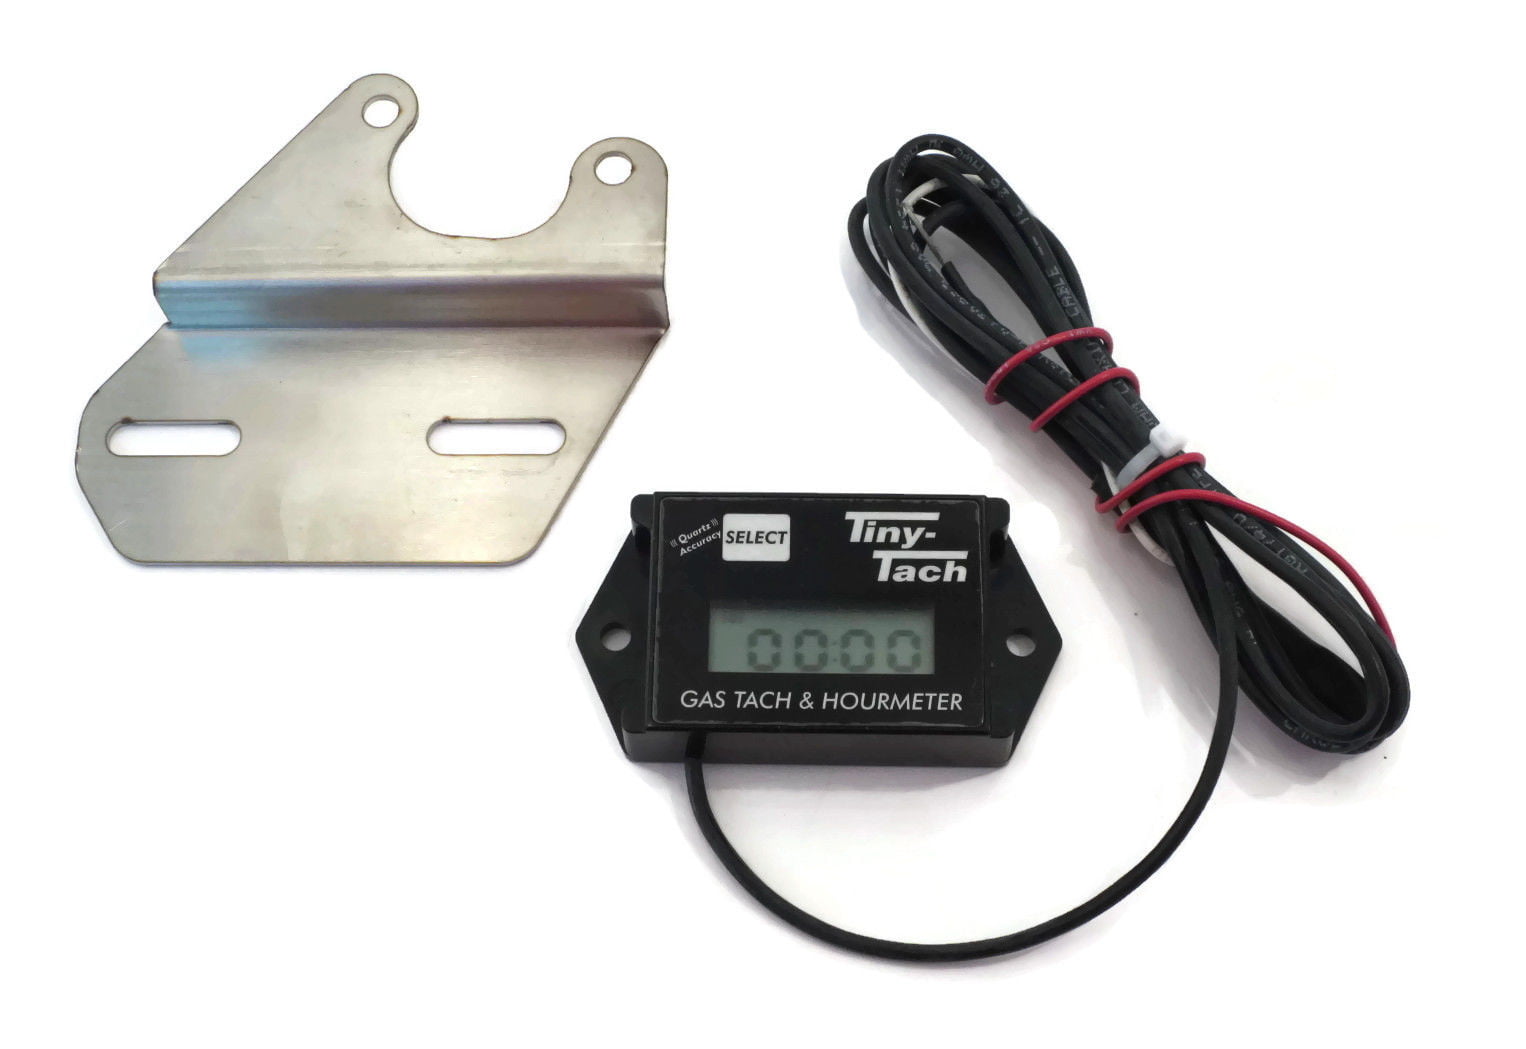 Tiny Tach TT2A Digital Hour Meter Tachometer Adjustable Resettable Job Timer by The ROP Shop